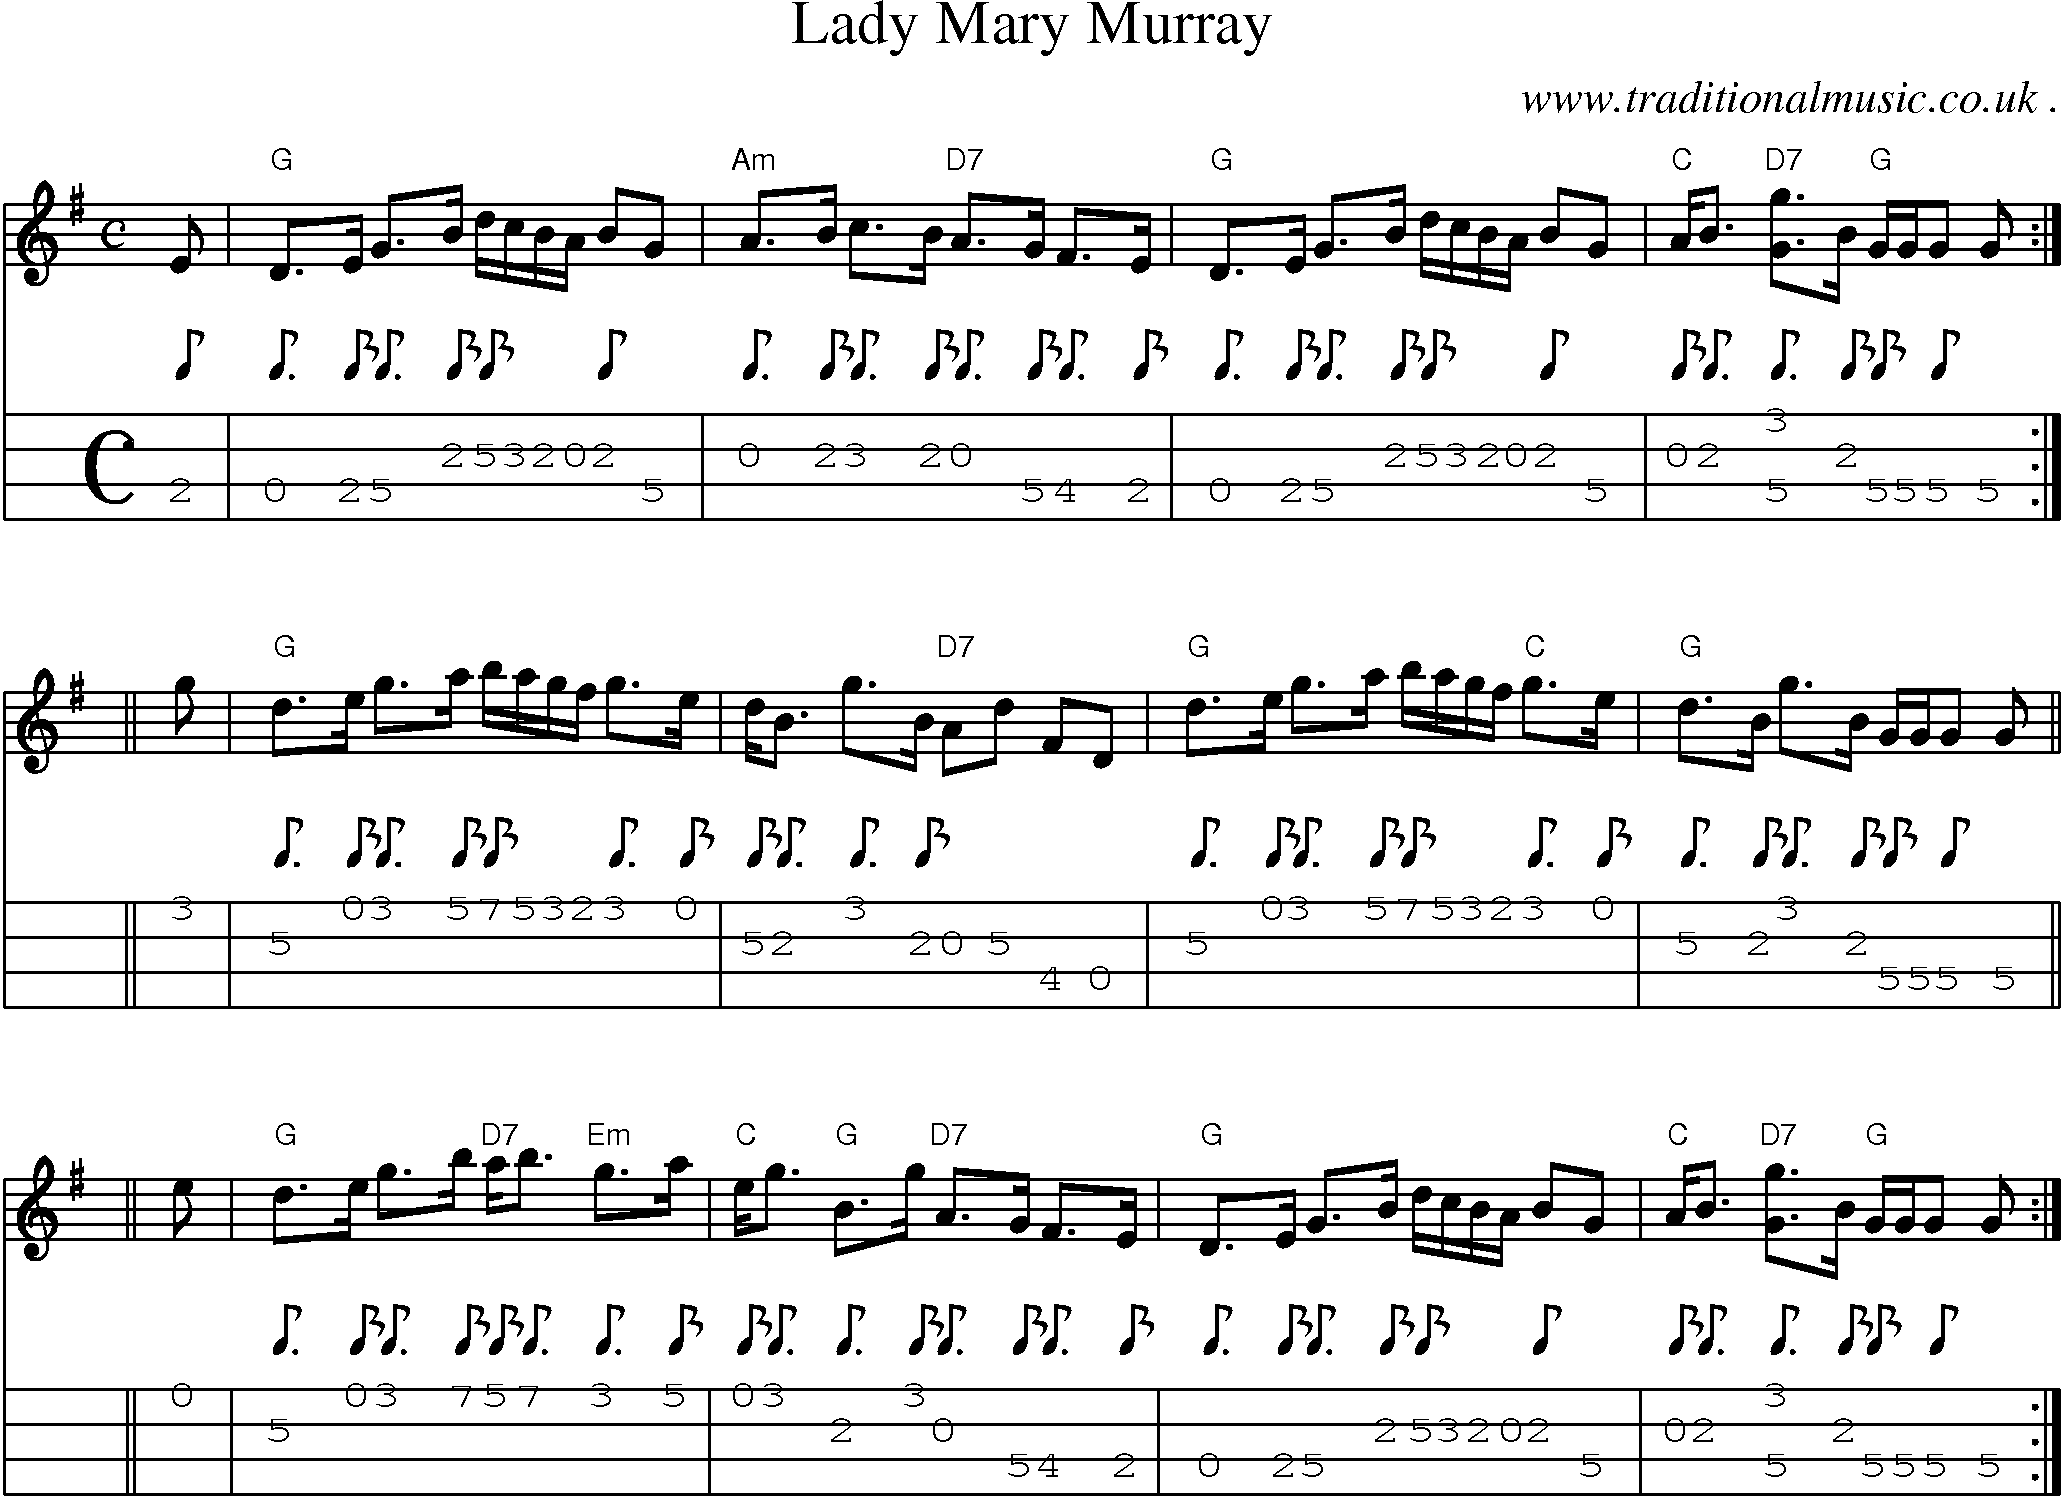 Sheet-music  score, Chords and Mandolin Tabs for Lady Mary Murray